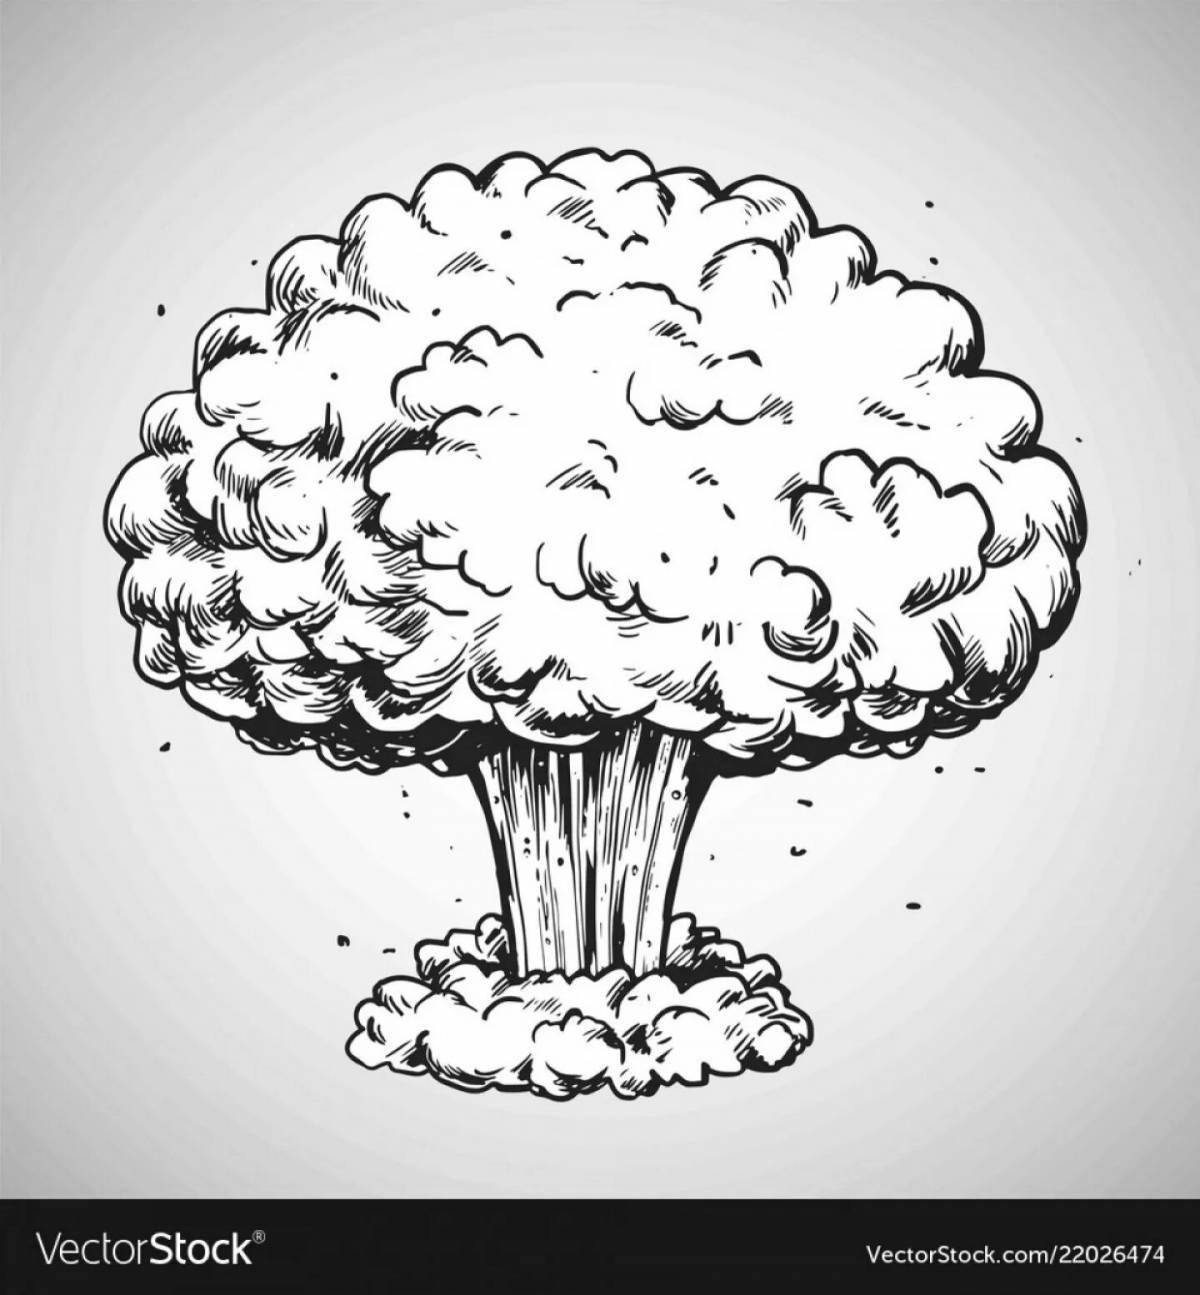 Fascinating nuclear explosion coloring book